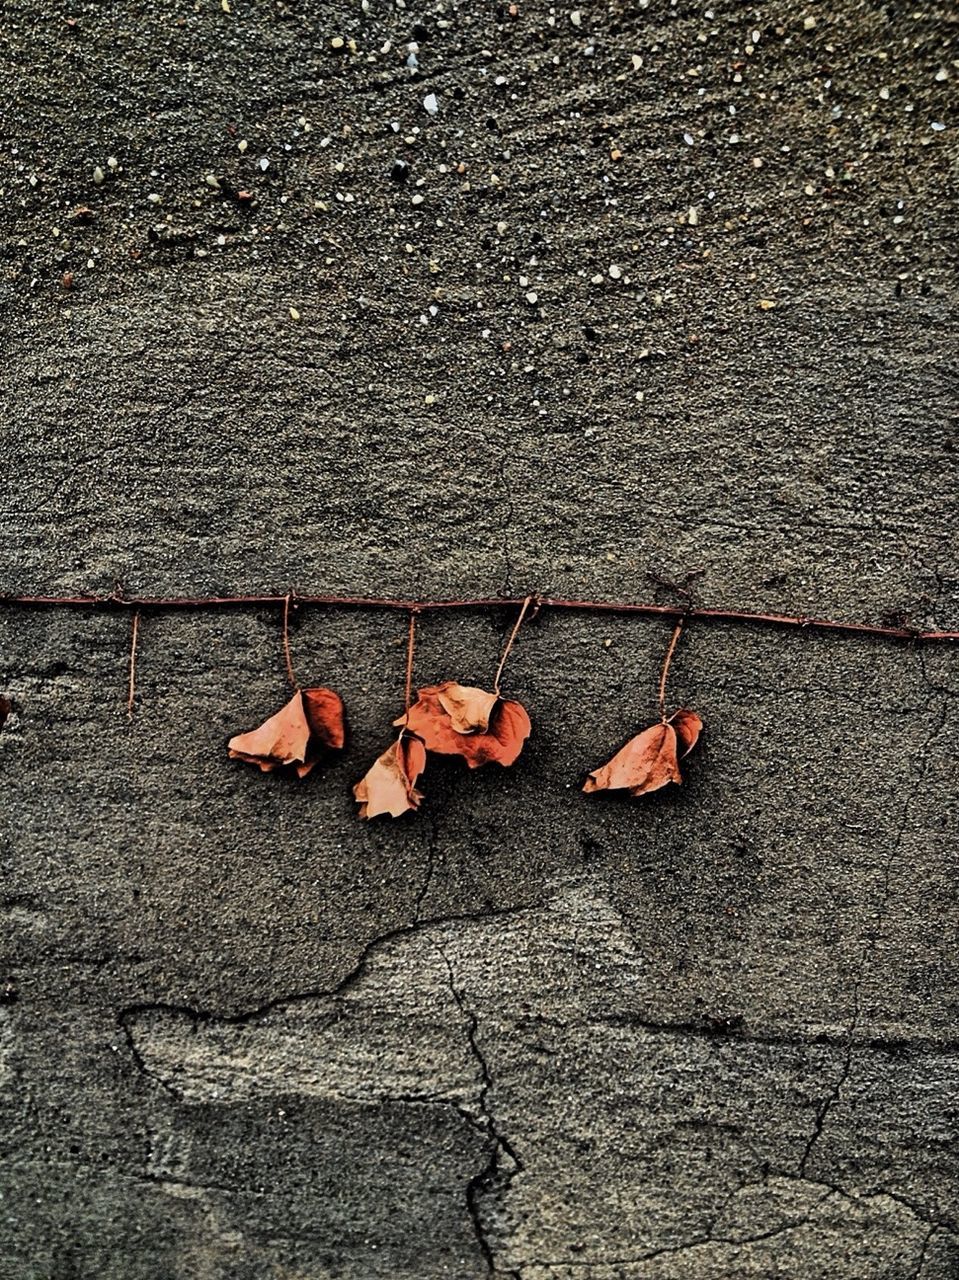 high angle view, autumn, street, leaf, asphalt, dry, fallen, change, ground, textured, road, close-up, outdoors, cobblestone, falling, maple leaf, red, day, sidewalk, leaves